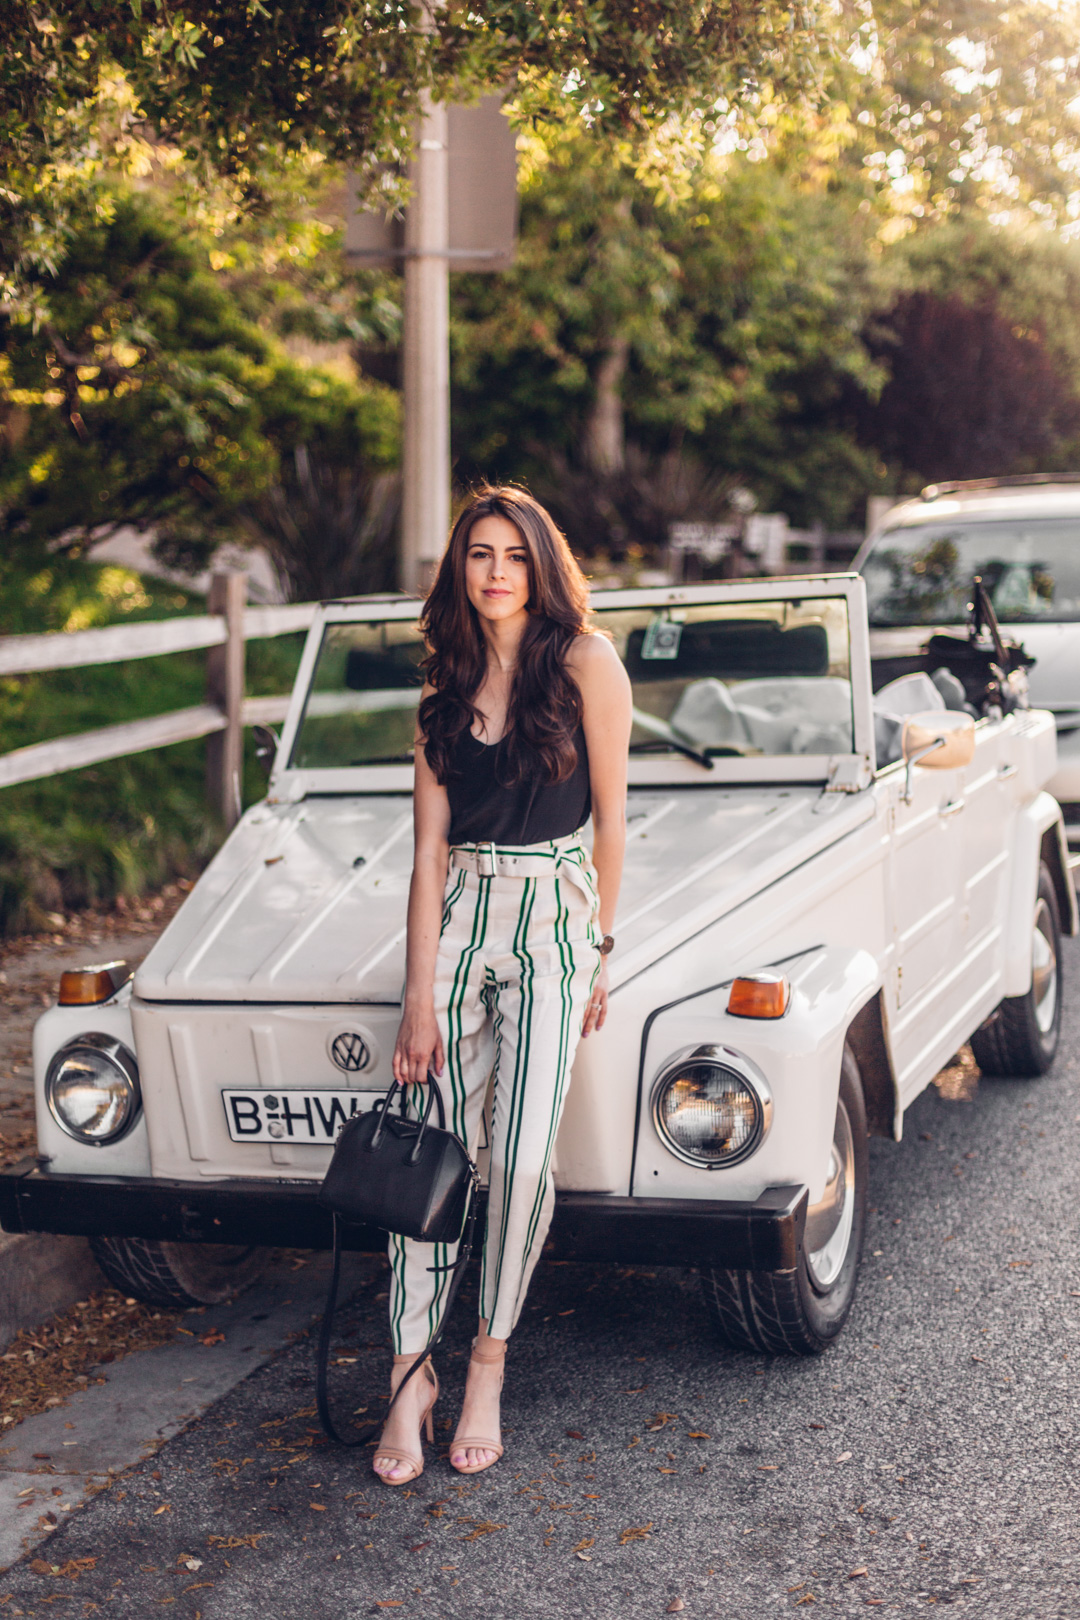 Jackie Roque styling a Topshop stripe pant, Habitual Top and Givenchy bag in Malibu.